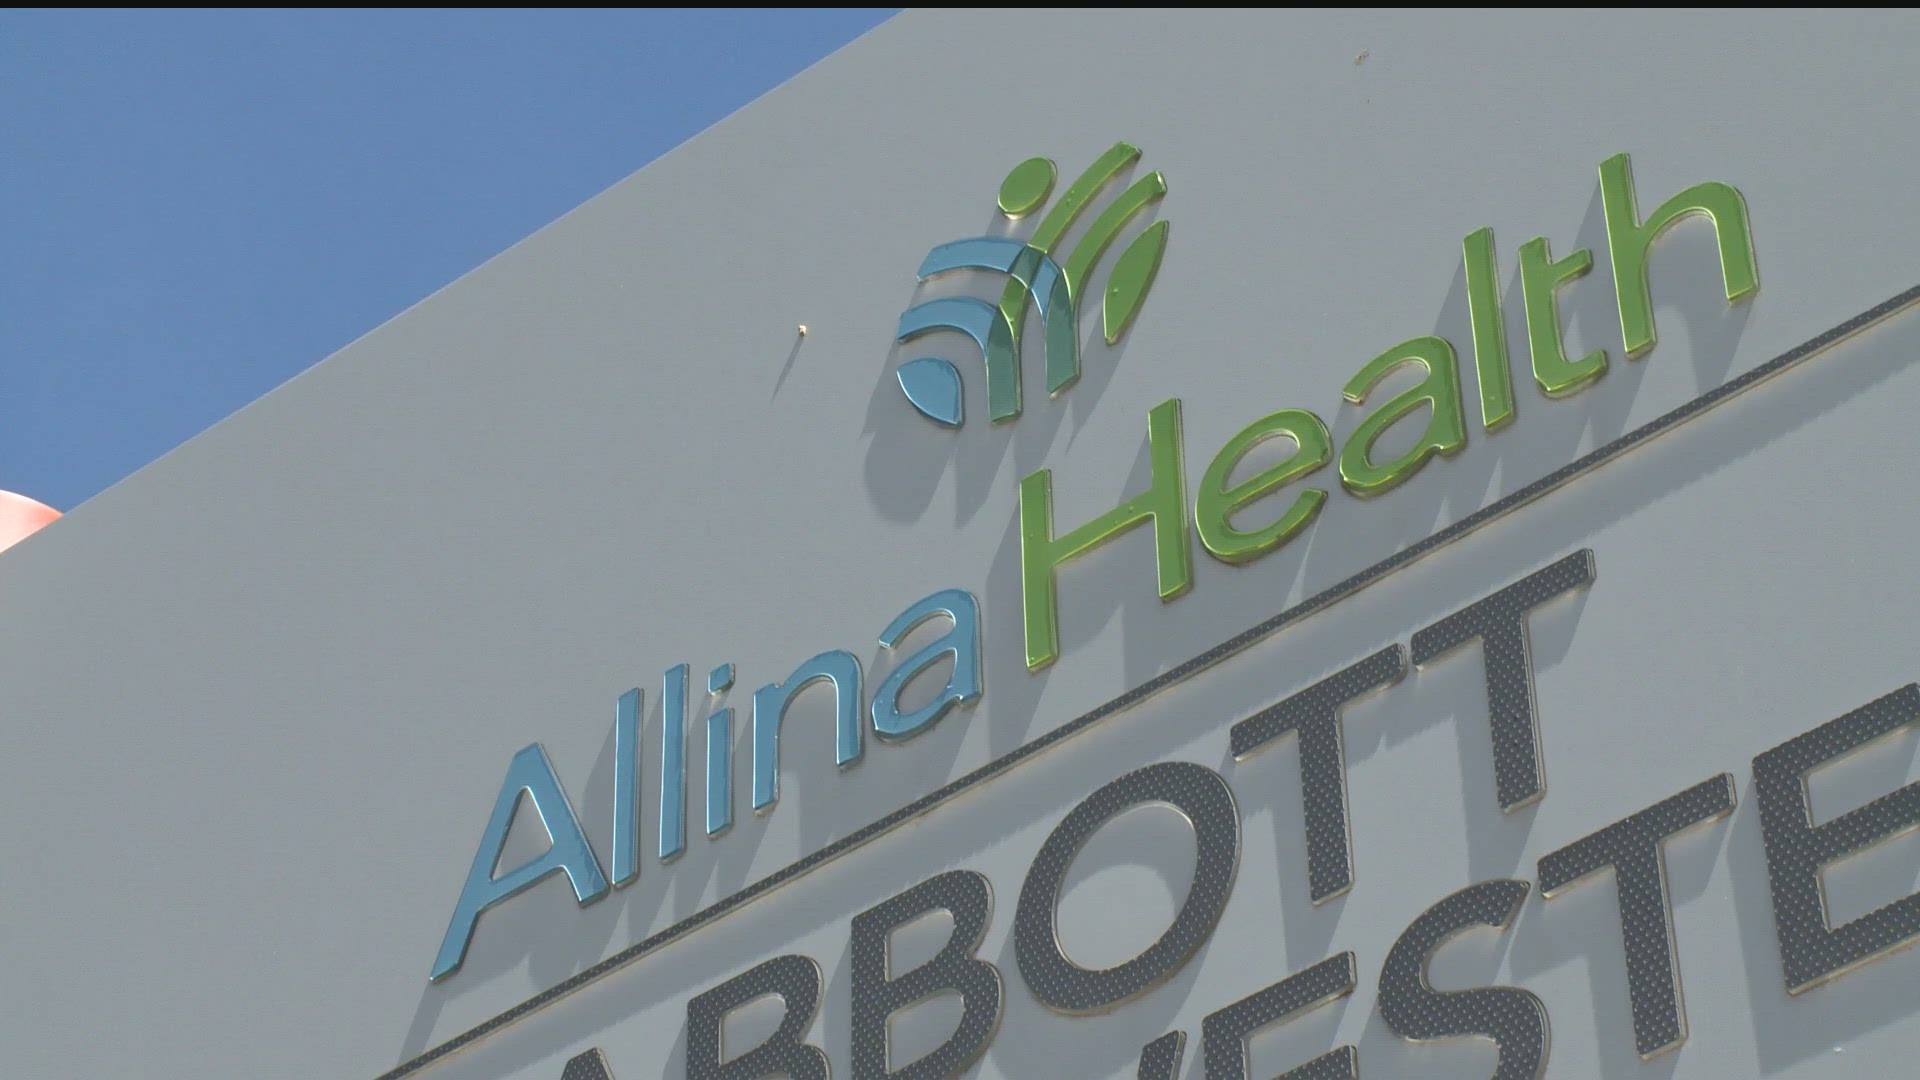 Allina health care workers announce May 15 as strike date